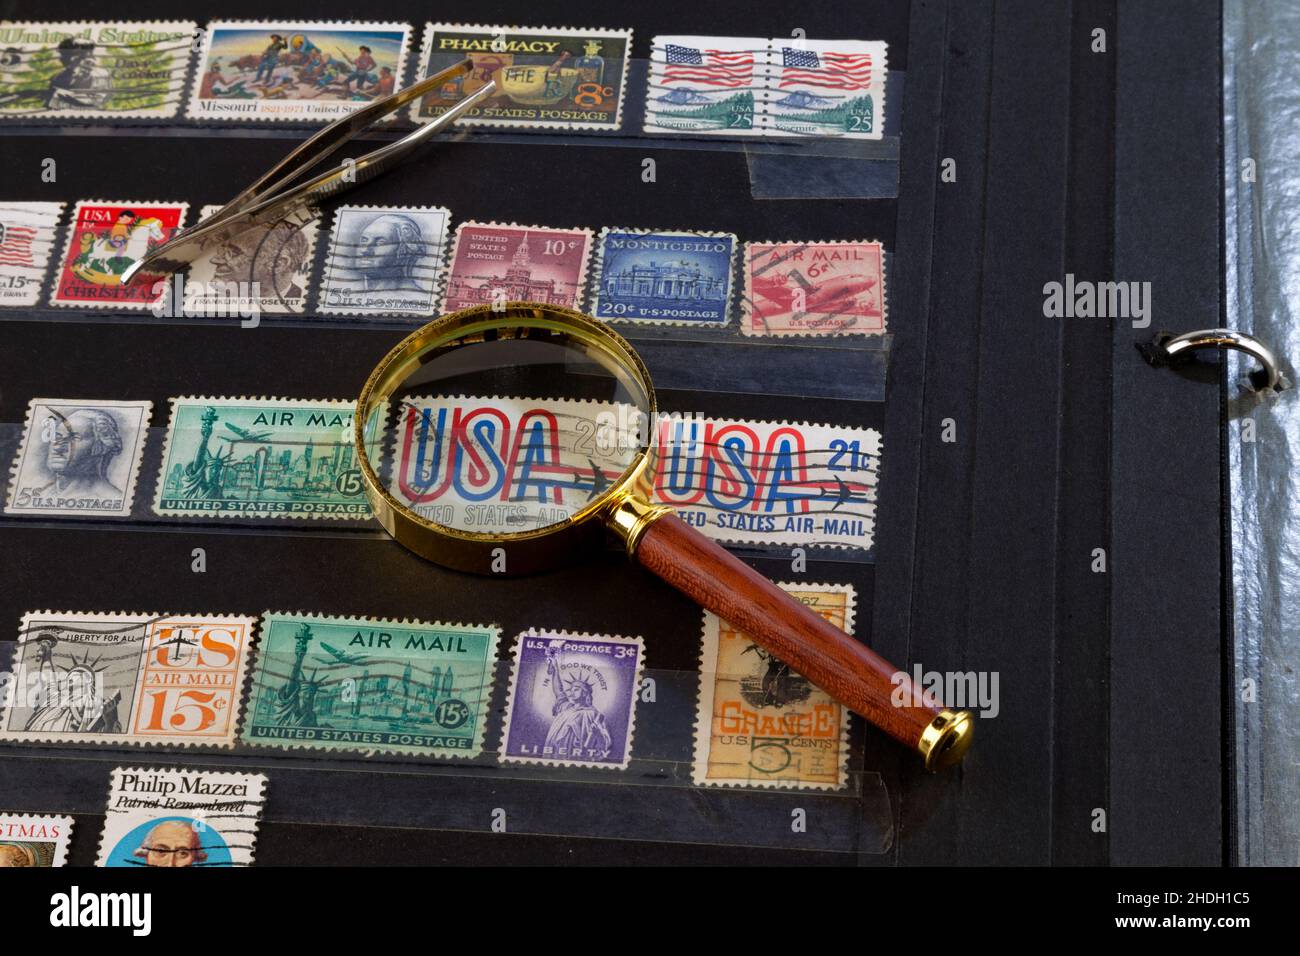 Stamp pliers and a magnifying glass on top of a stamp binder filled with old US stamps. Stock Photo